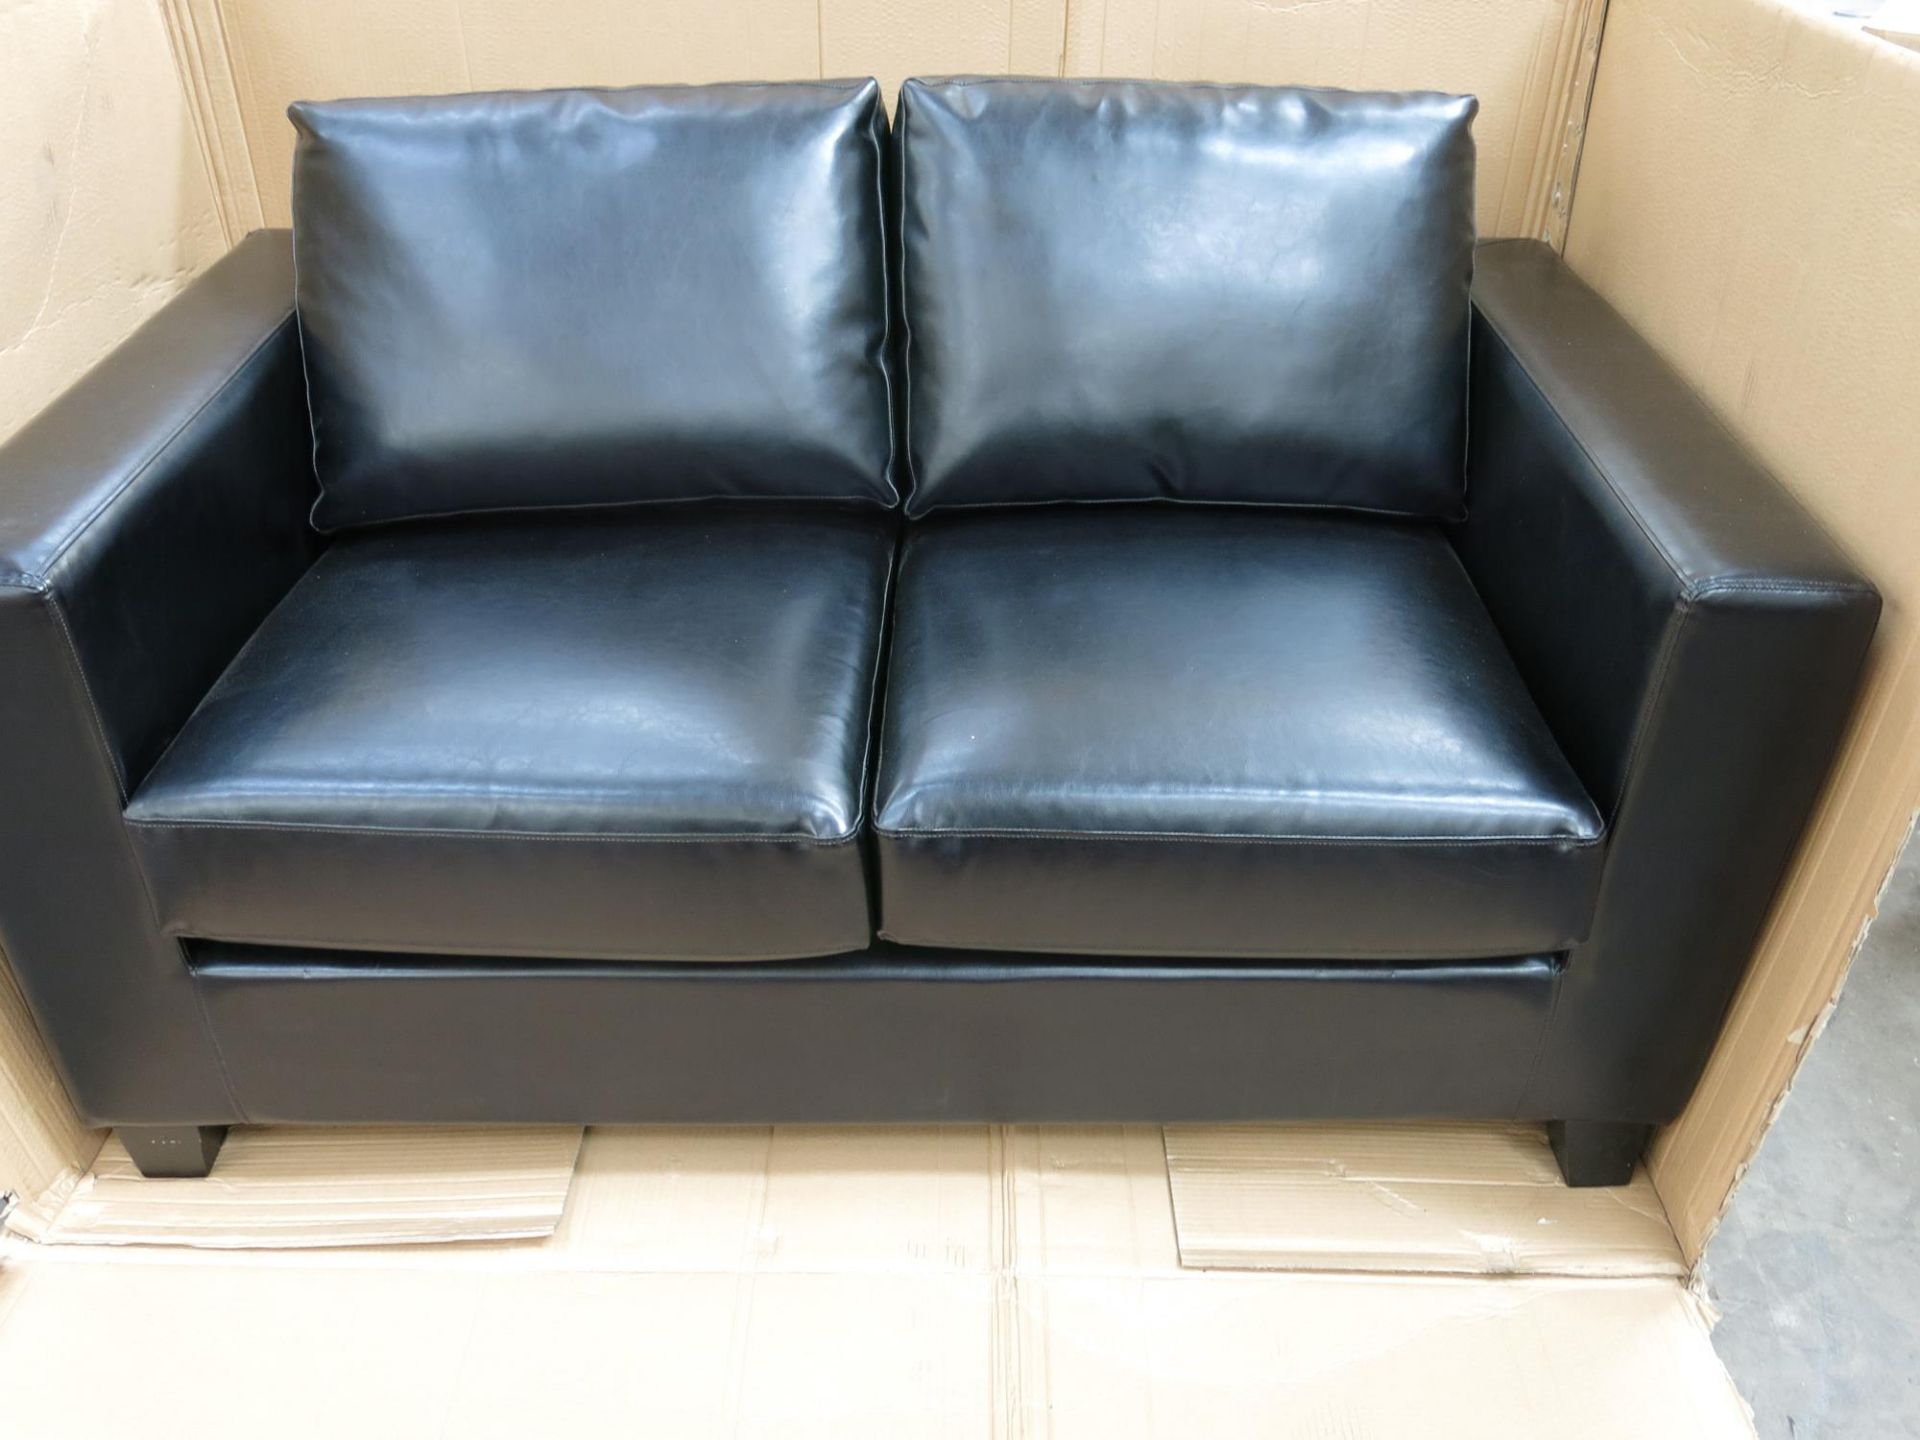 * A two seater sofa with black faux pu leather upholstery. Please note picture is for illustration